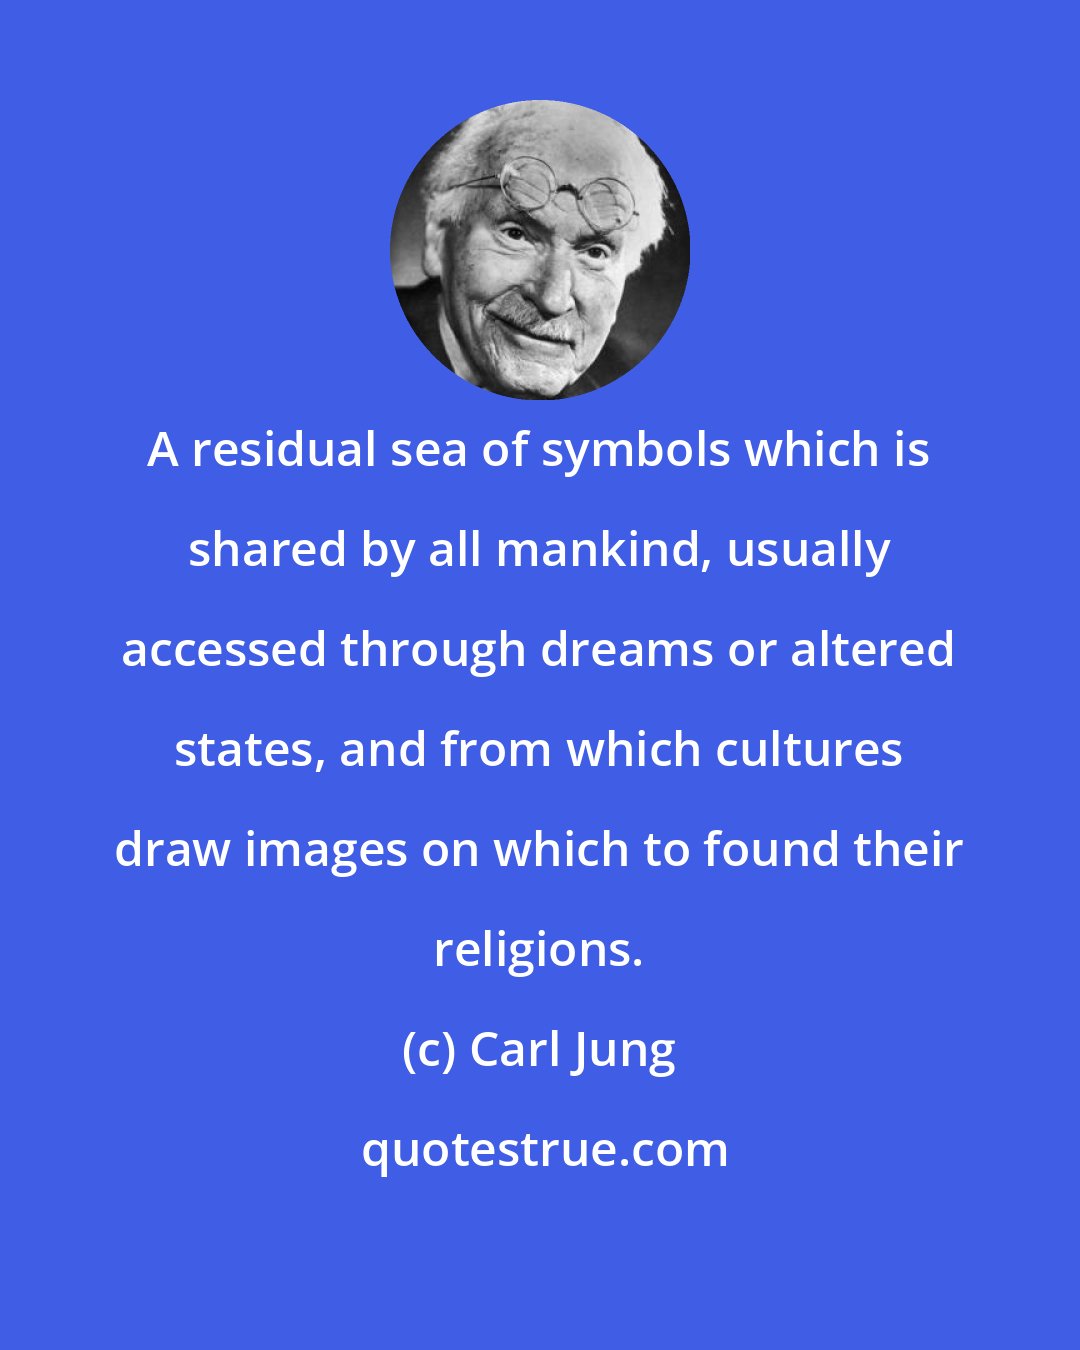 Carl Jung: A residual sea of symbols which is shared by all mankind, usually accessed through dreams or altered states, and from which cultures draw images on which to found their religions.